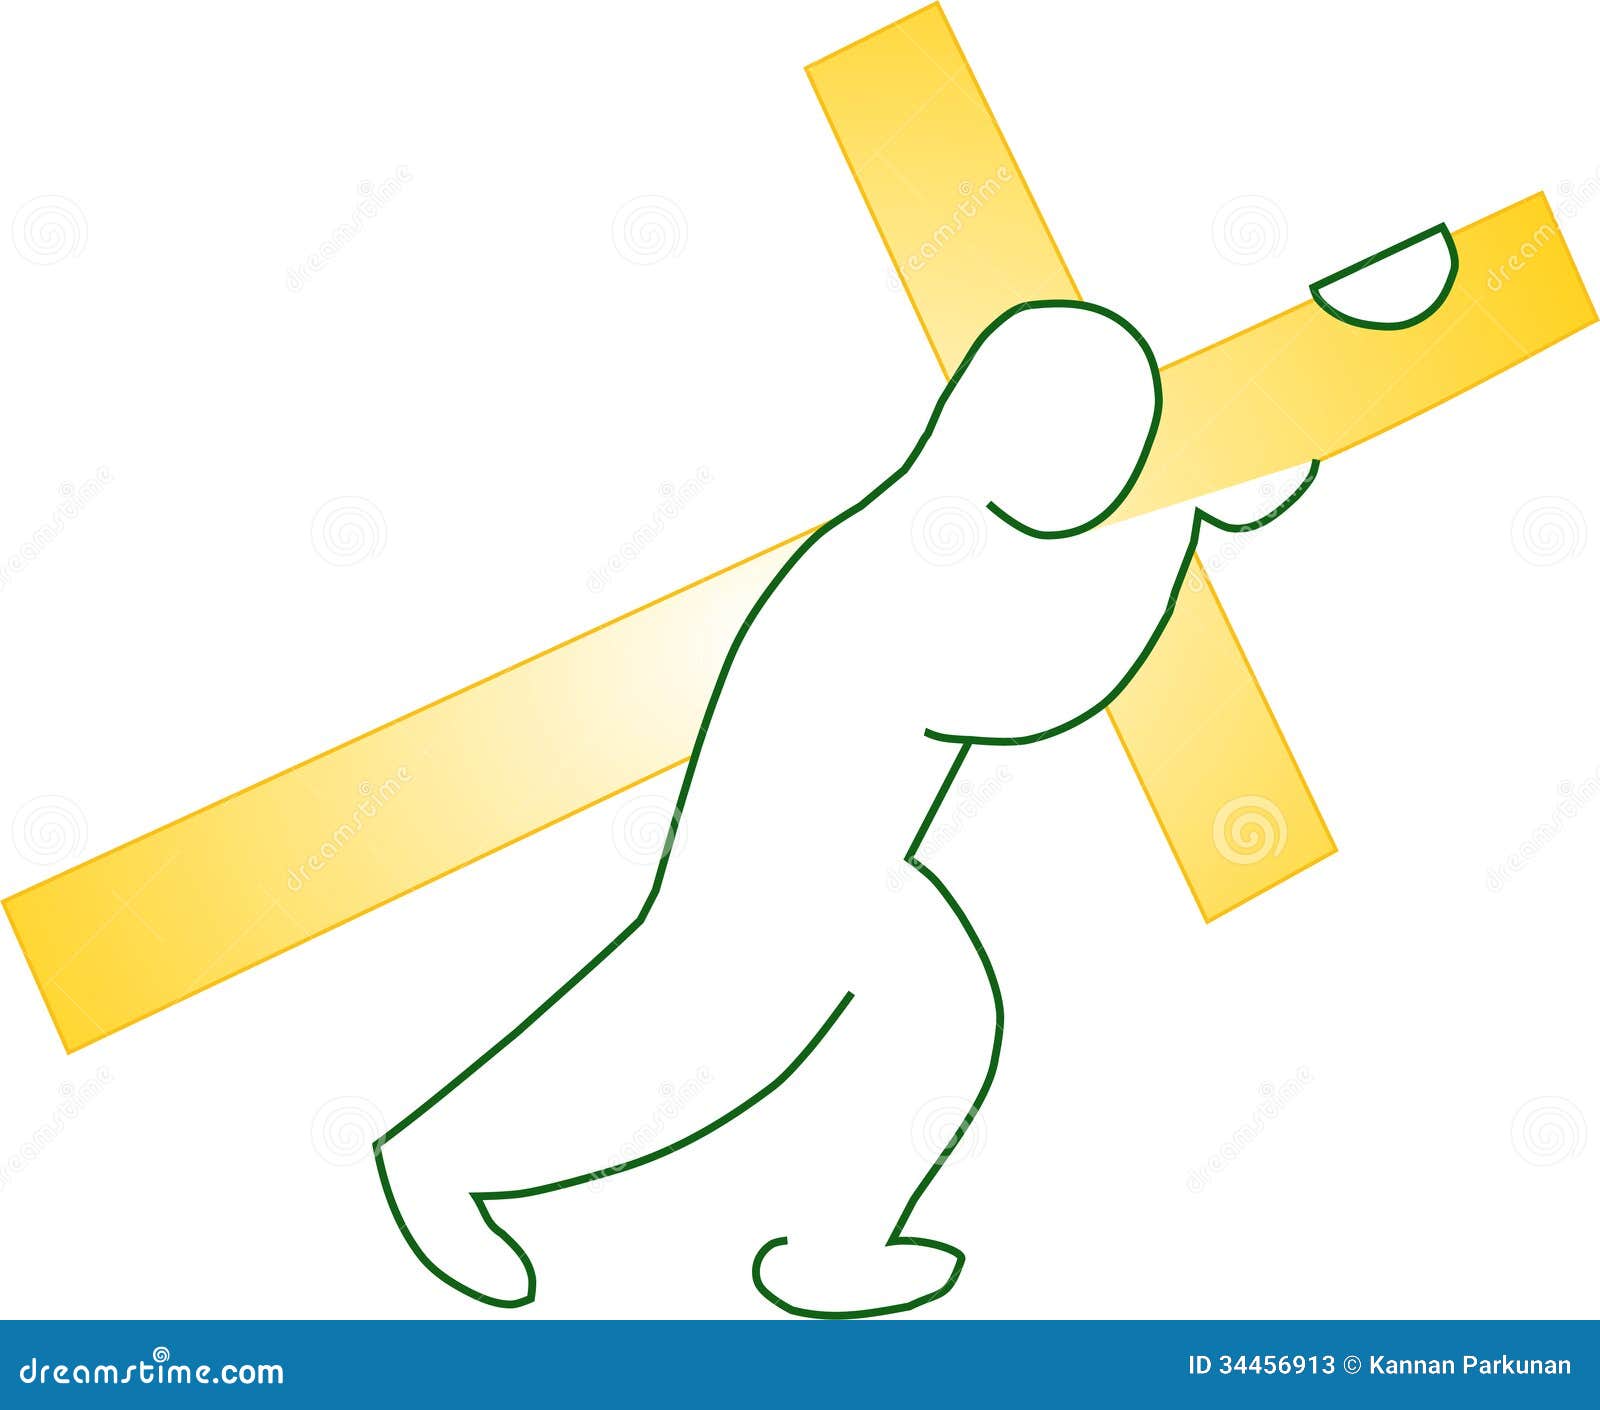 clipart jesus carrying cross - photo #8